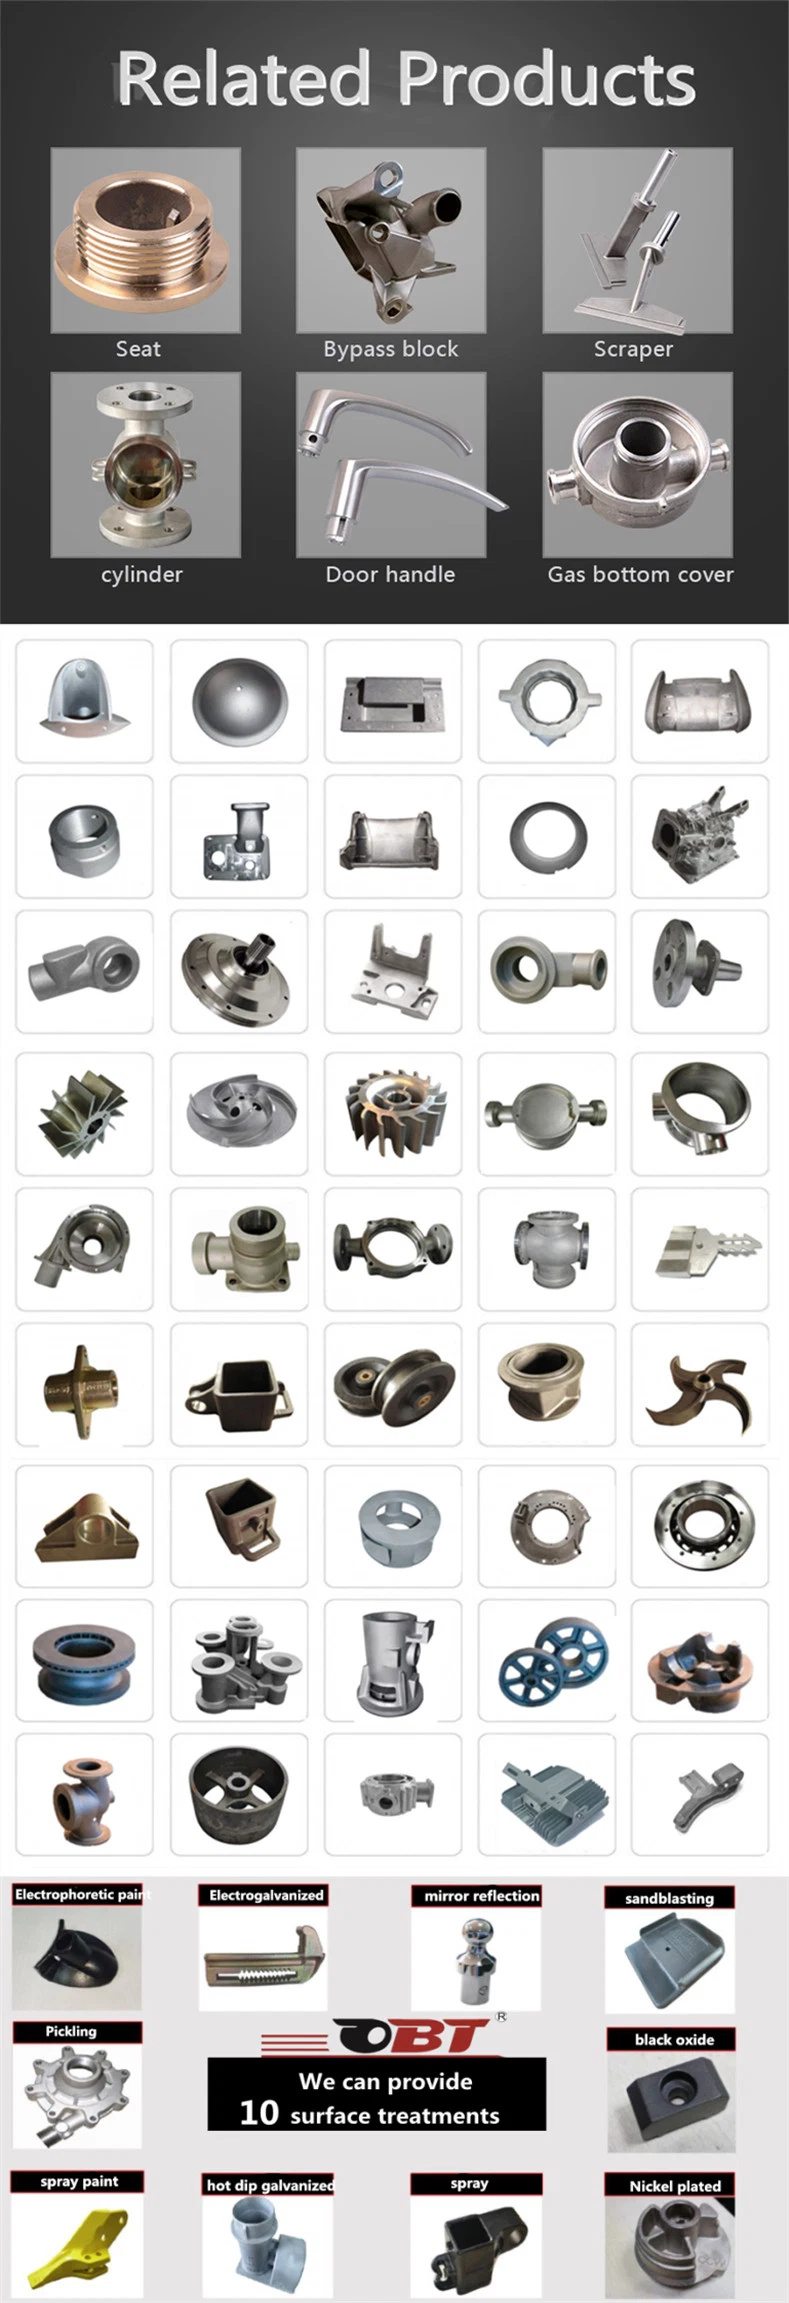 OEM Grey Iron Ductile Iron Casting/Steel/Aluminum Die Casting/Shell Mold/Clay Sand Casting/Green Sand Casting